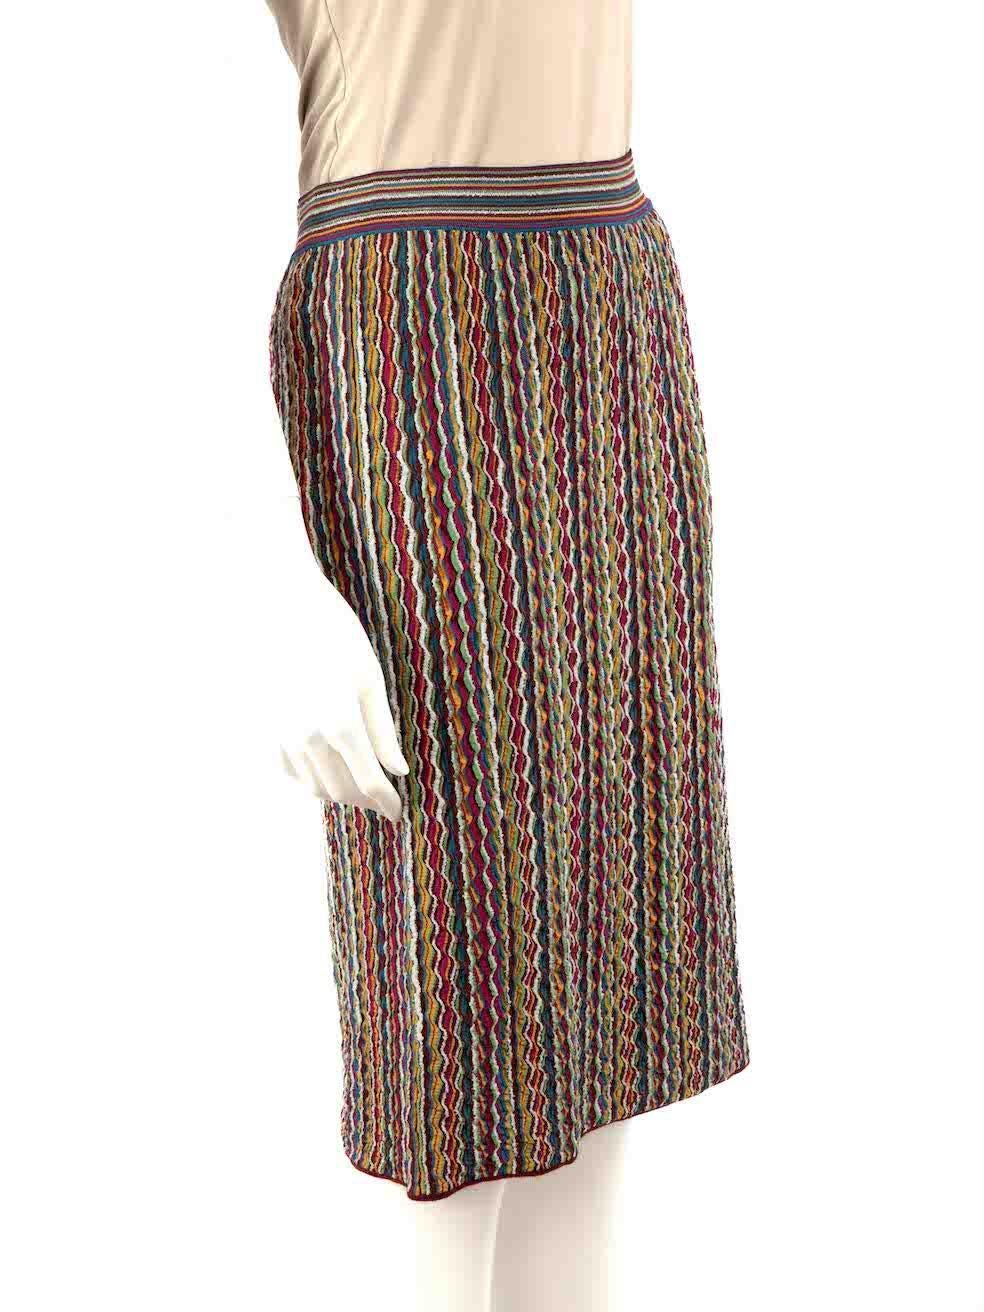 CONDITION is Very good. Hardly any visible wear to skirt is evident on this used M Missoni Limited designer resale item.
 
 Details
 Multicolour
 Cotton
 Knitted straight skirt
 Striped pattern
 Elasticated waistband
 Stretchy
 
 
 Made in Tunisia
